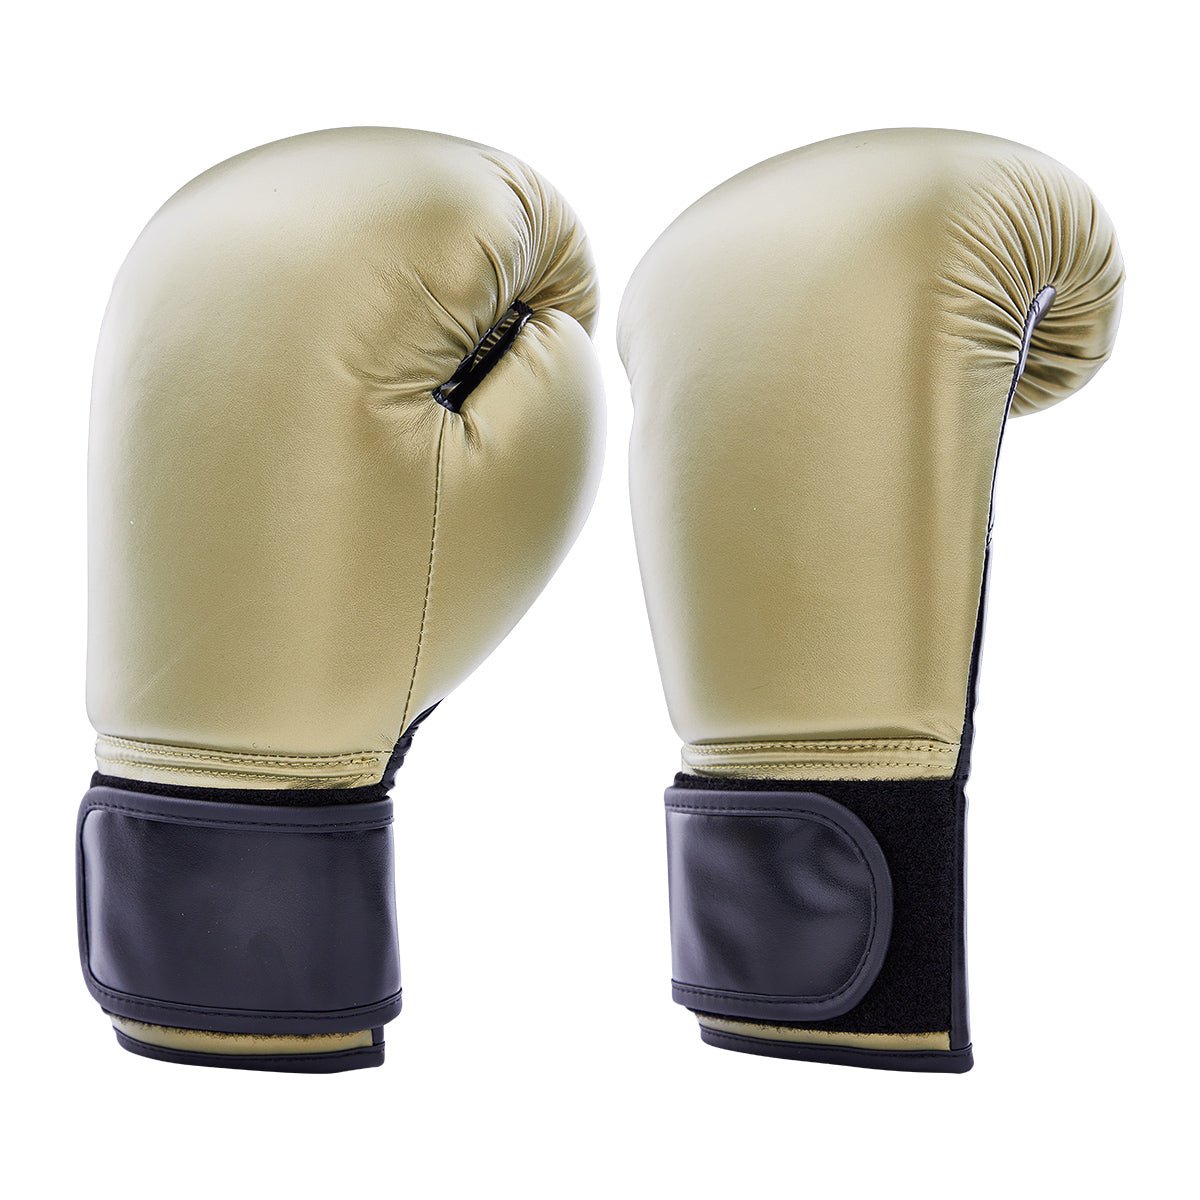 Century Solid Boxing Glove